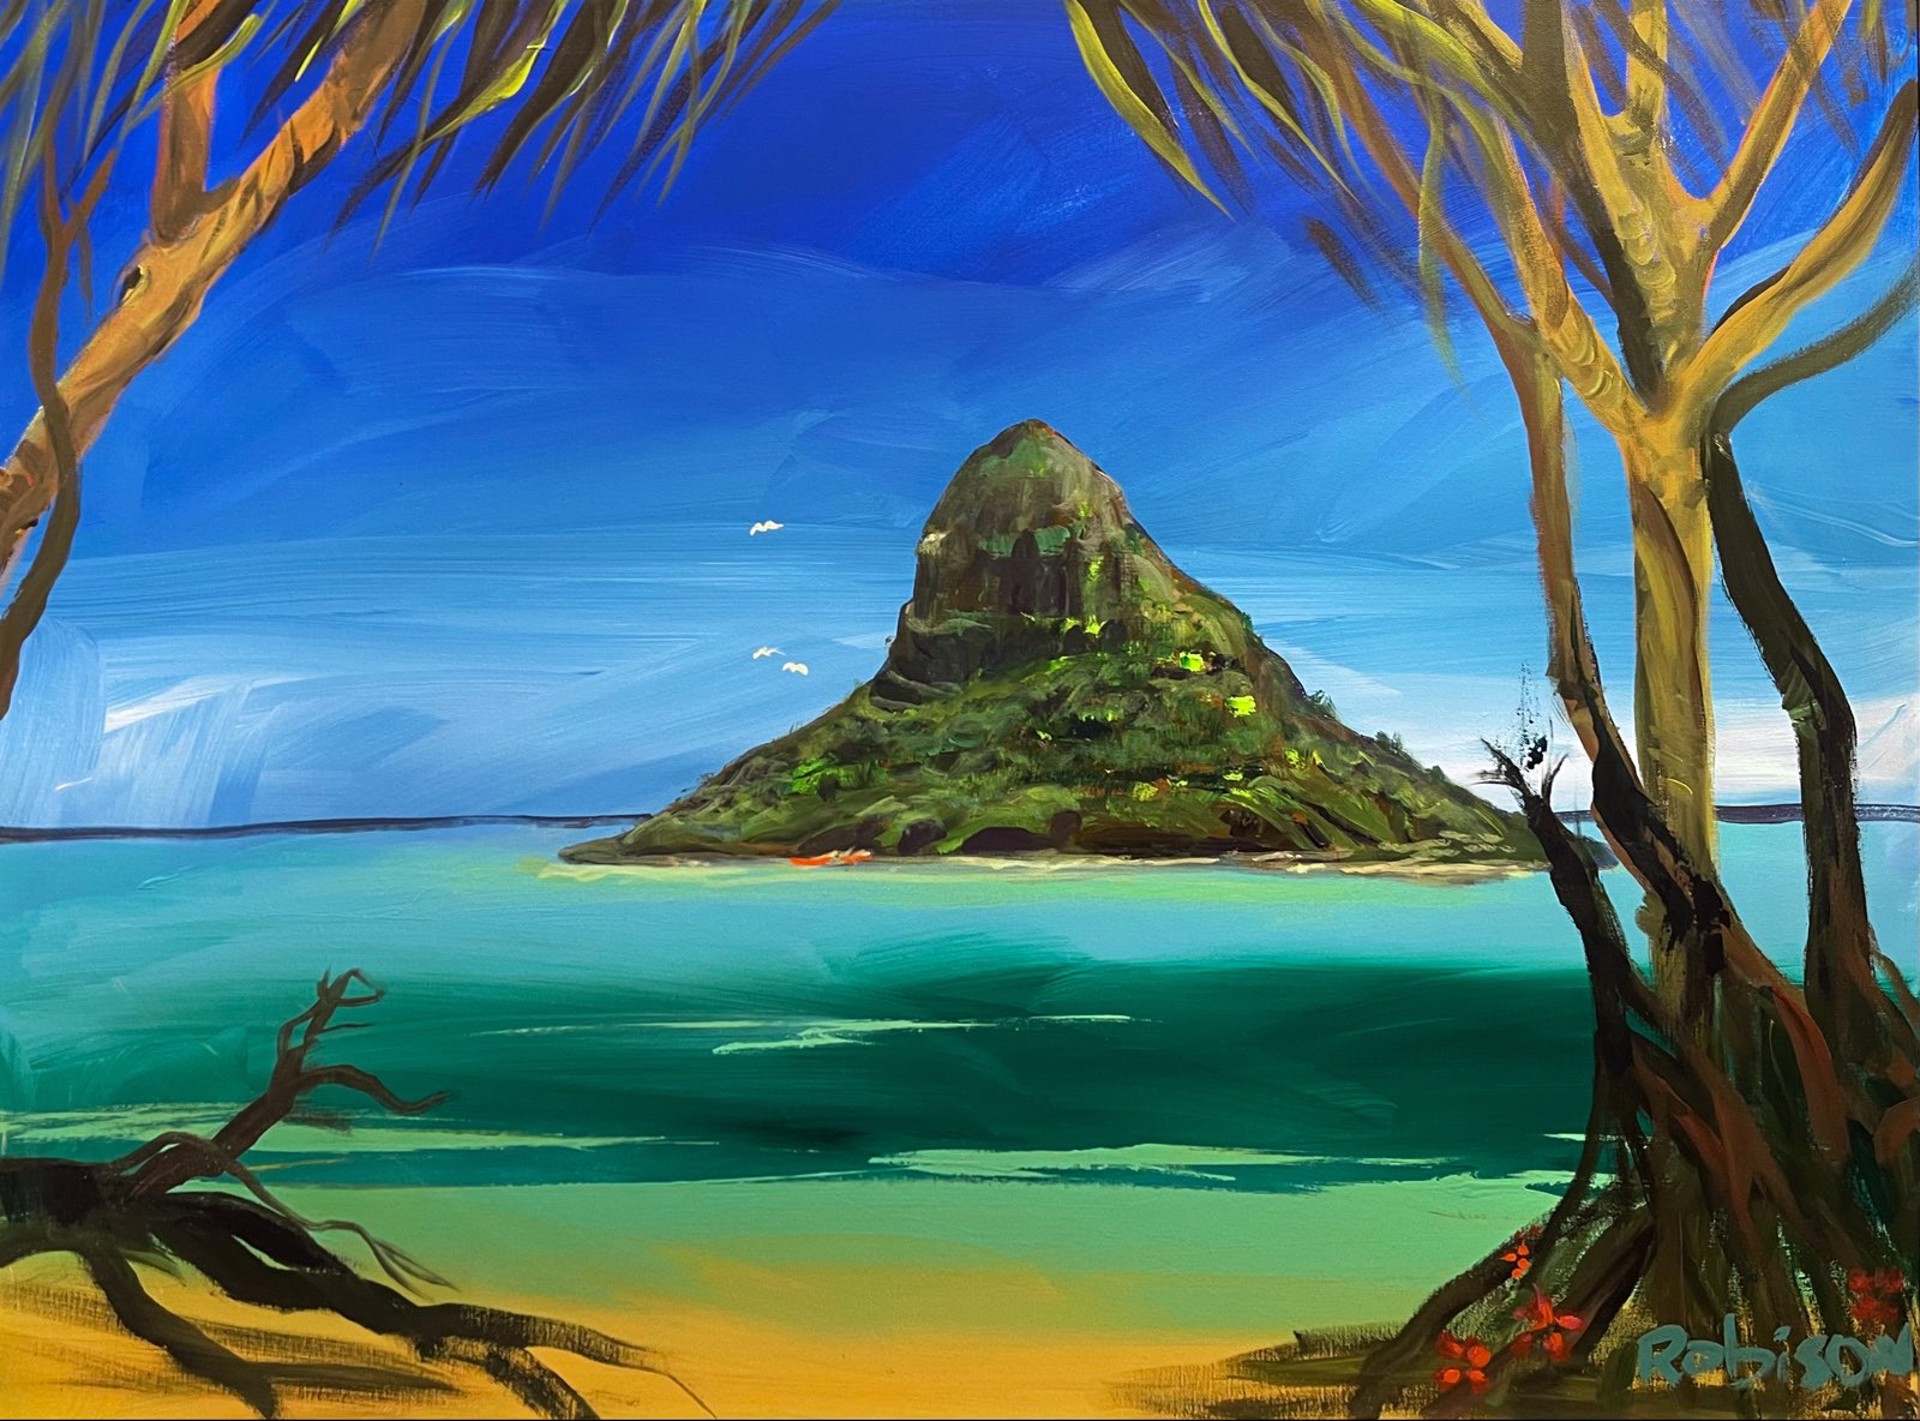 Chinaman’s Hat by Eric Robison